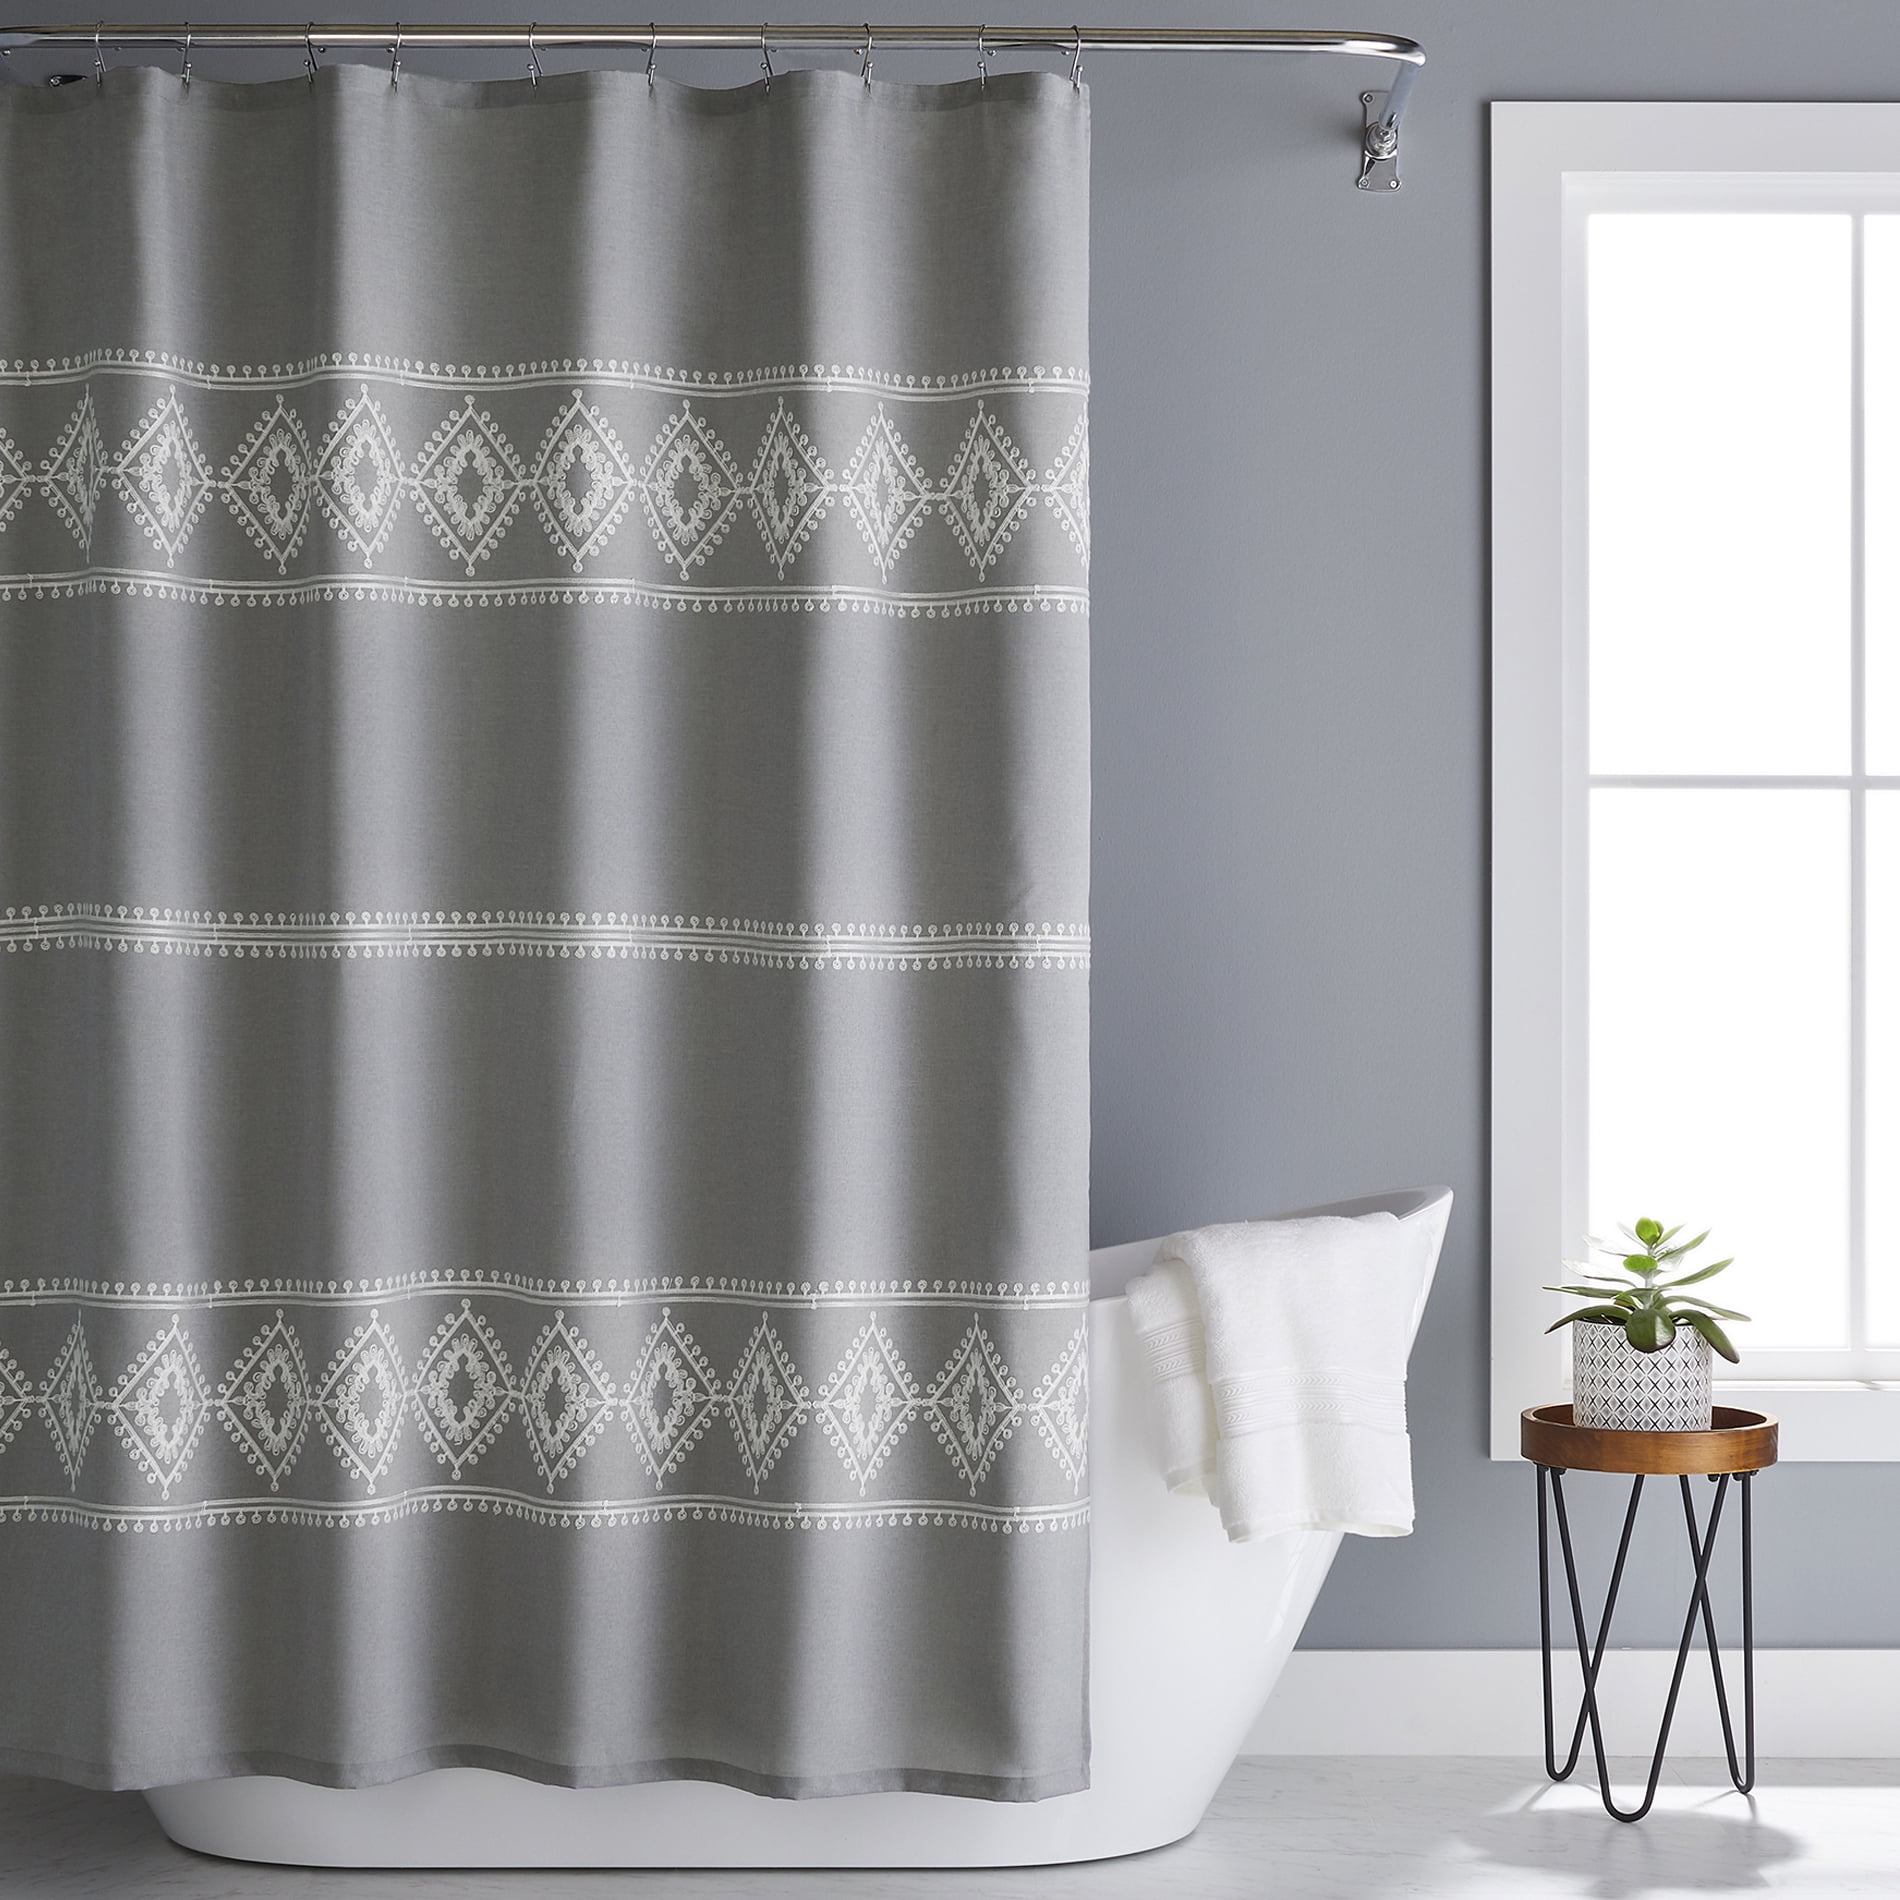 NEW Hookless ez on Ogee Tan taupe print Shower Curtain with Peva Liner 